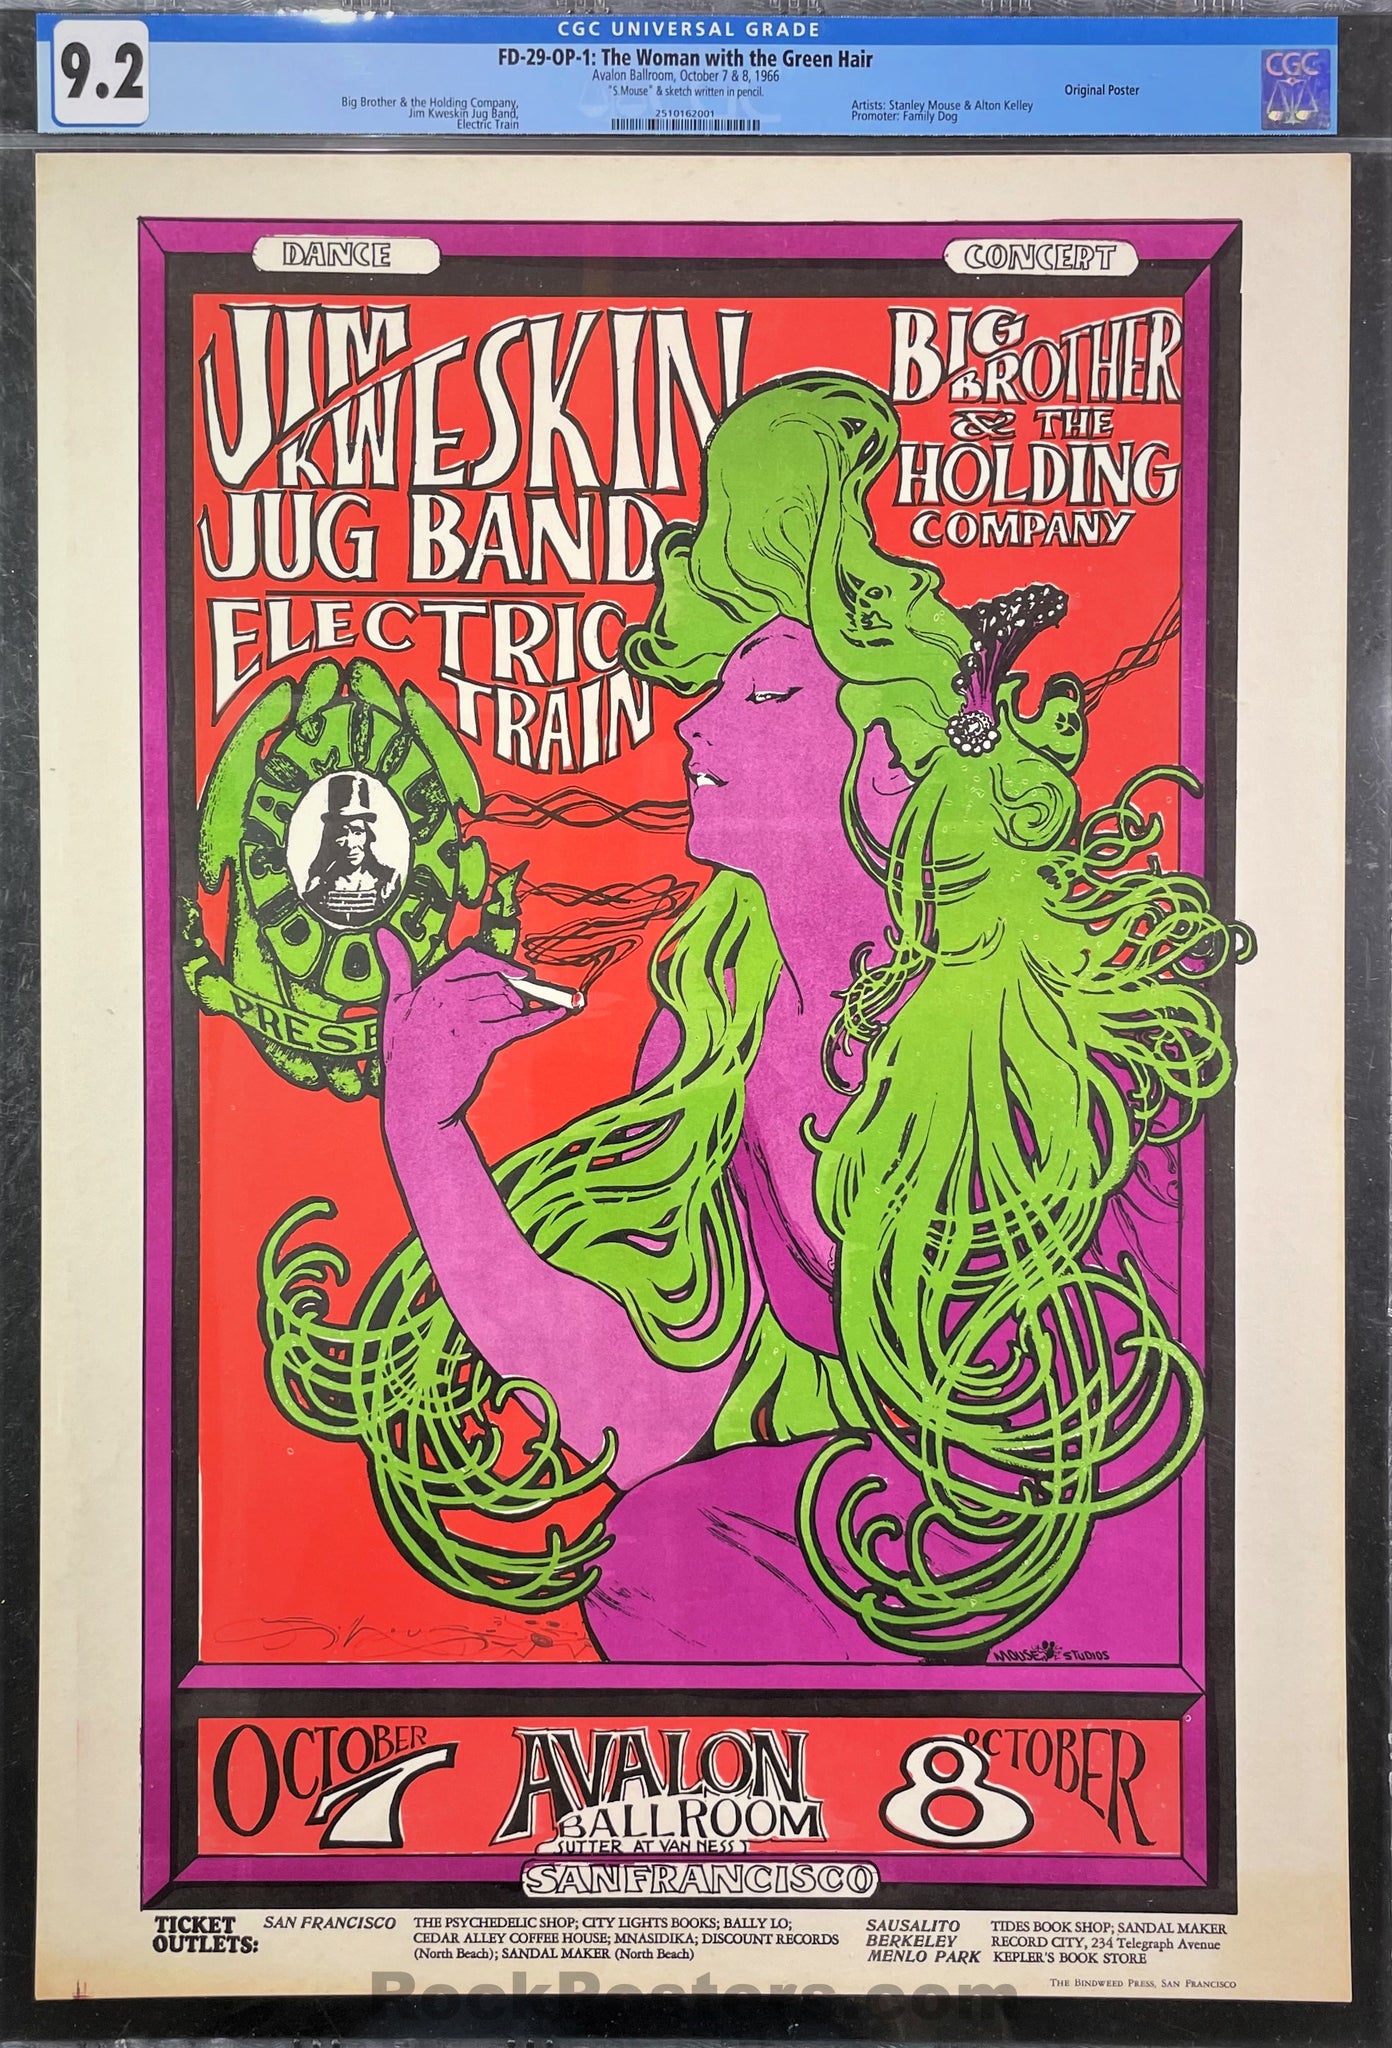 AUCTION - FD-29 - Big Brother Janis Joplin - Mouse SIGNED - 1966 Poster - Avalon Ballroom - CGC Graded 9.2